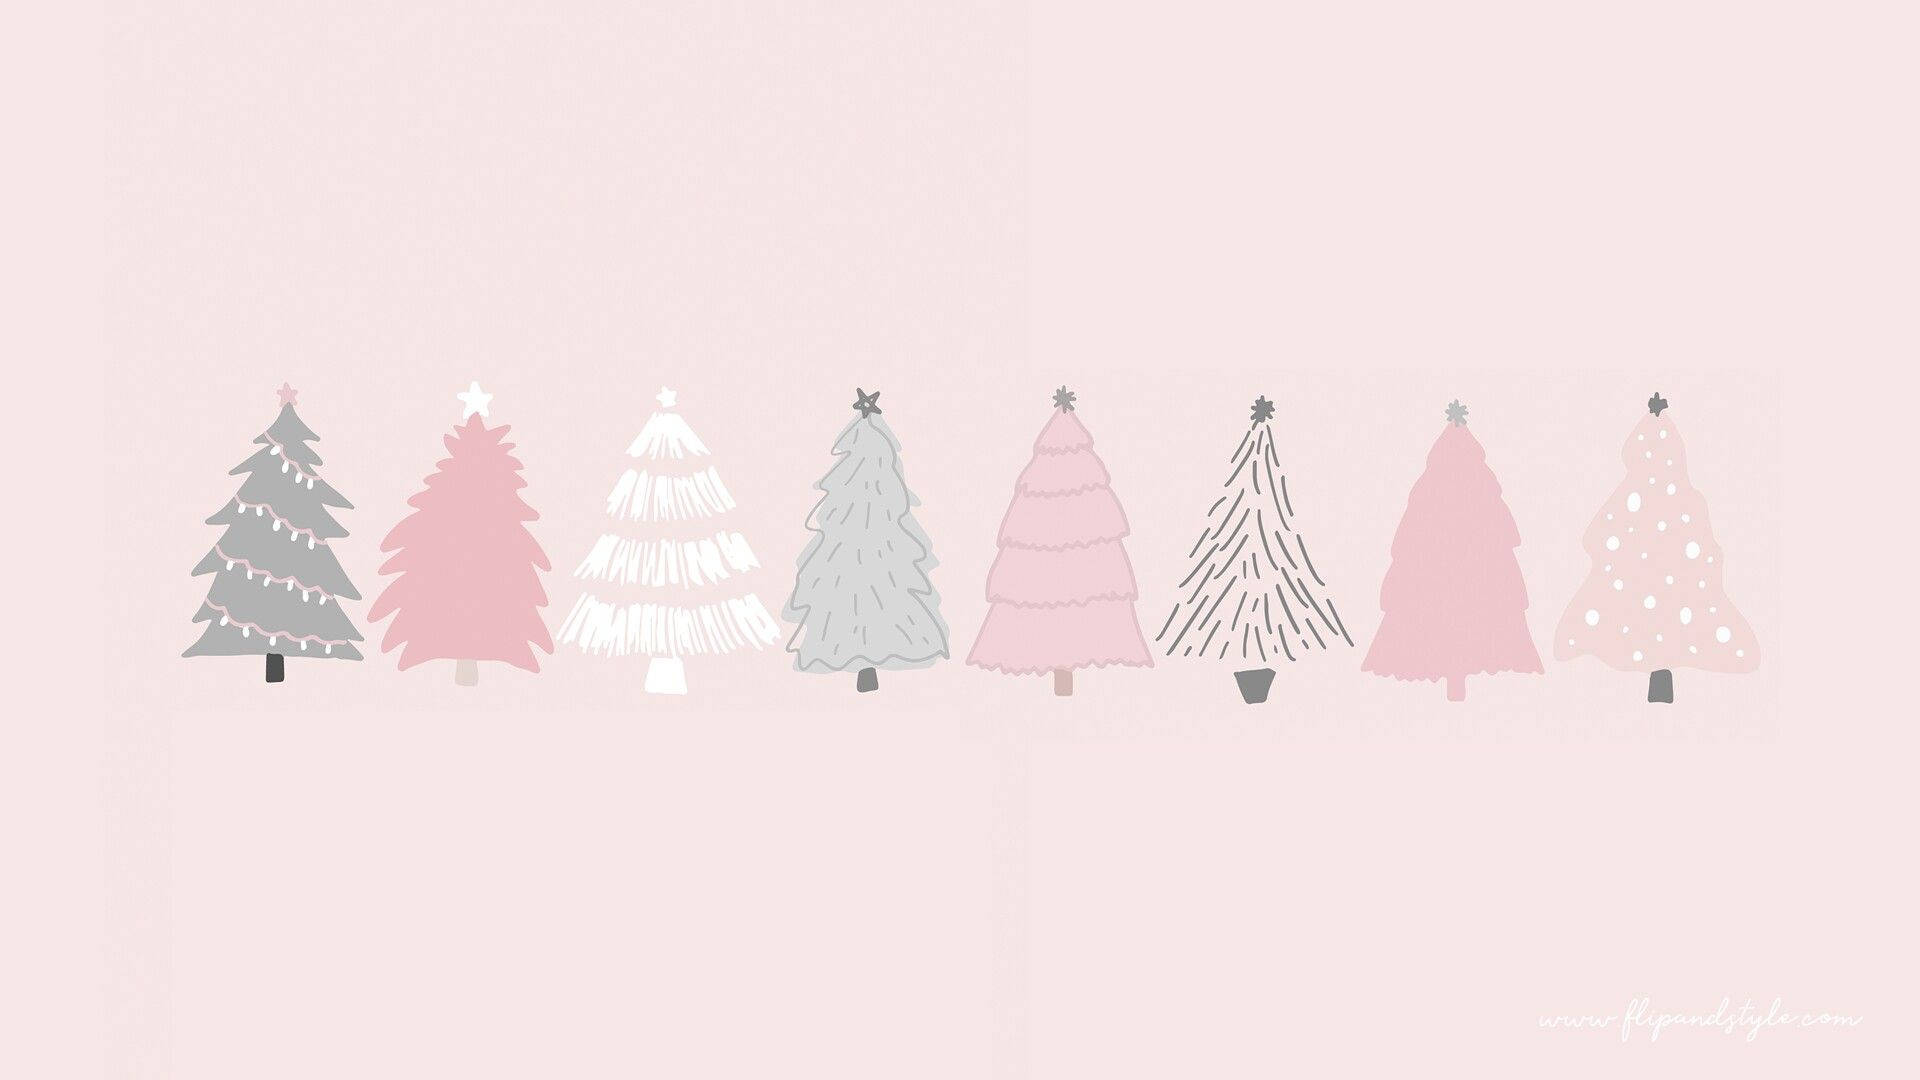 Minimalist Christmas Pictures Wallpaper